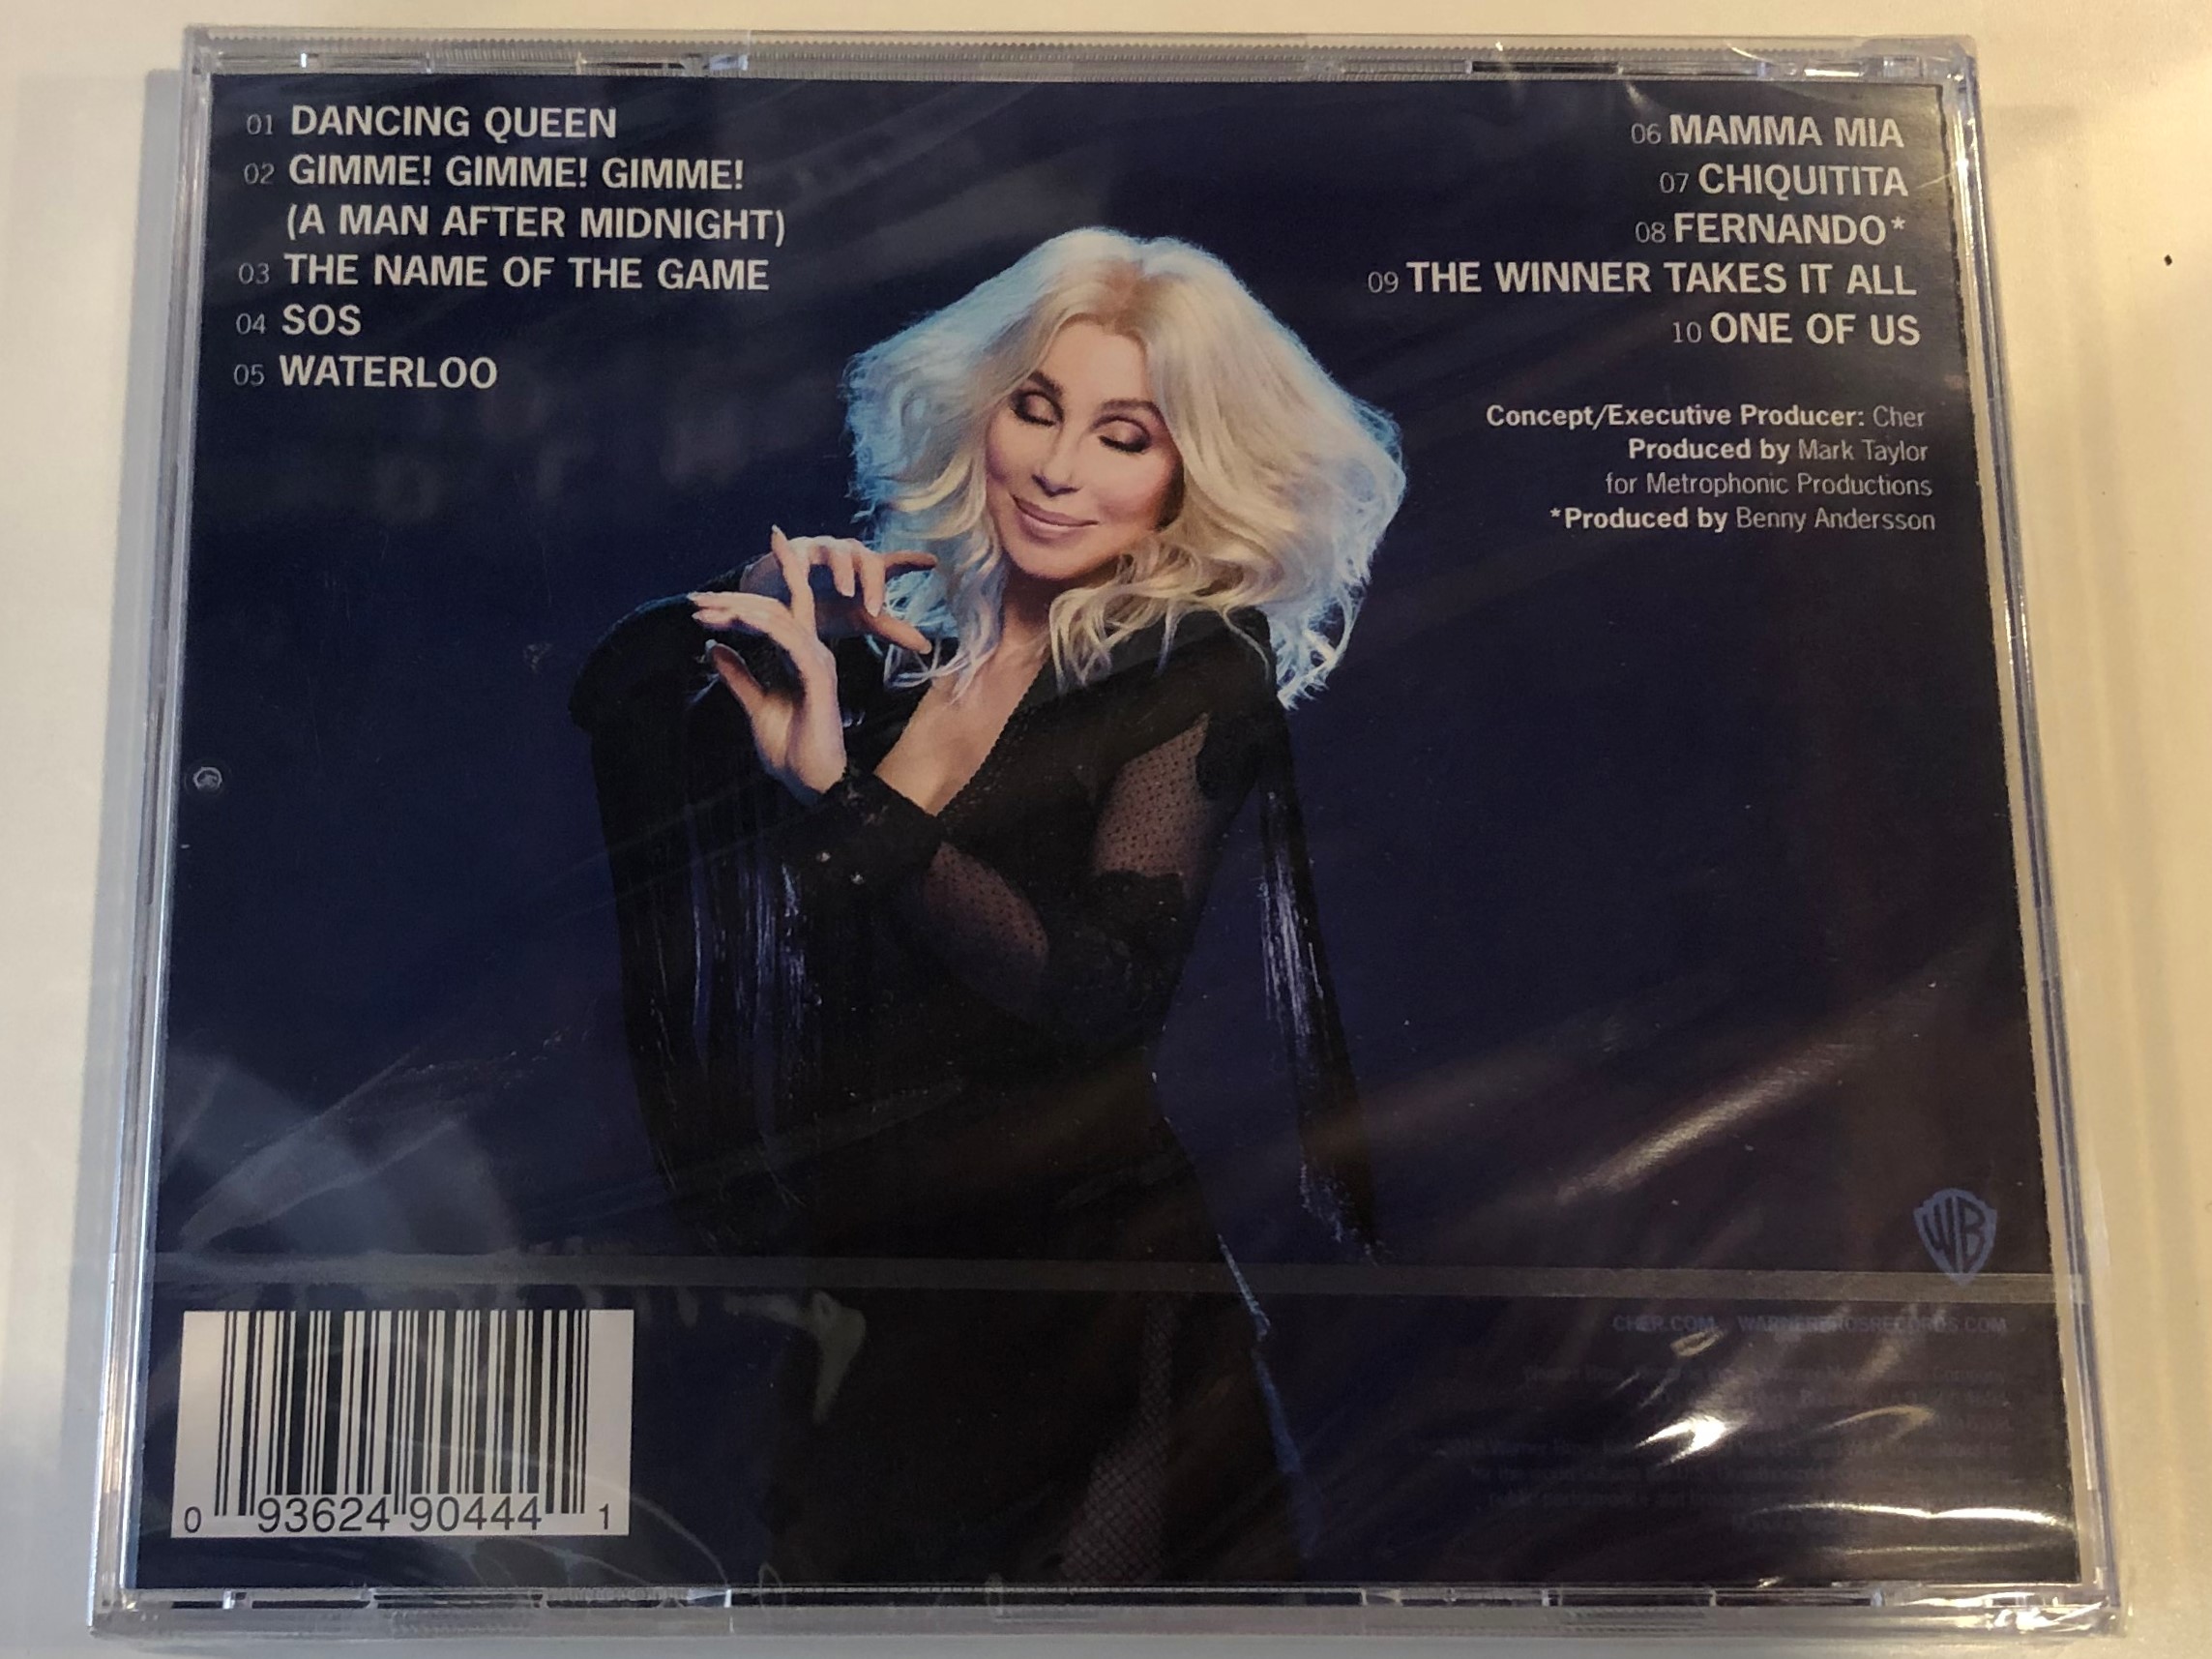 cher-dancing-queen-sos-gimme-gimme-gimme-chiquitita-one-of-us-the-name-of-the-game-fernando-from-mamma-mia-here-we-go-again-warner-bros.-records-audio-cd-2018-9362-49044-4-2-.jpg